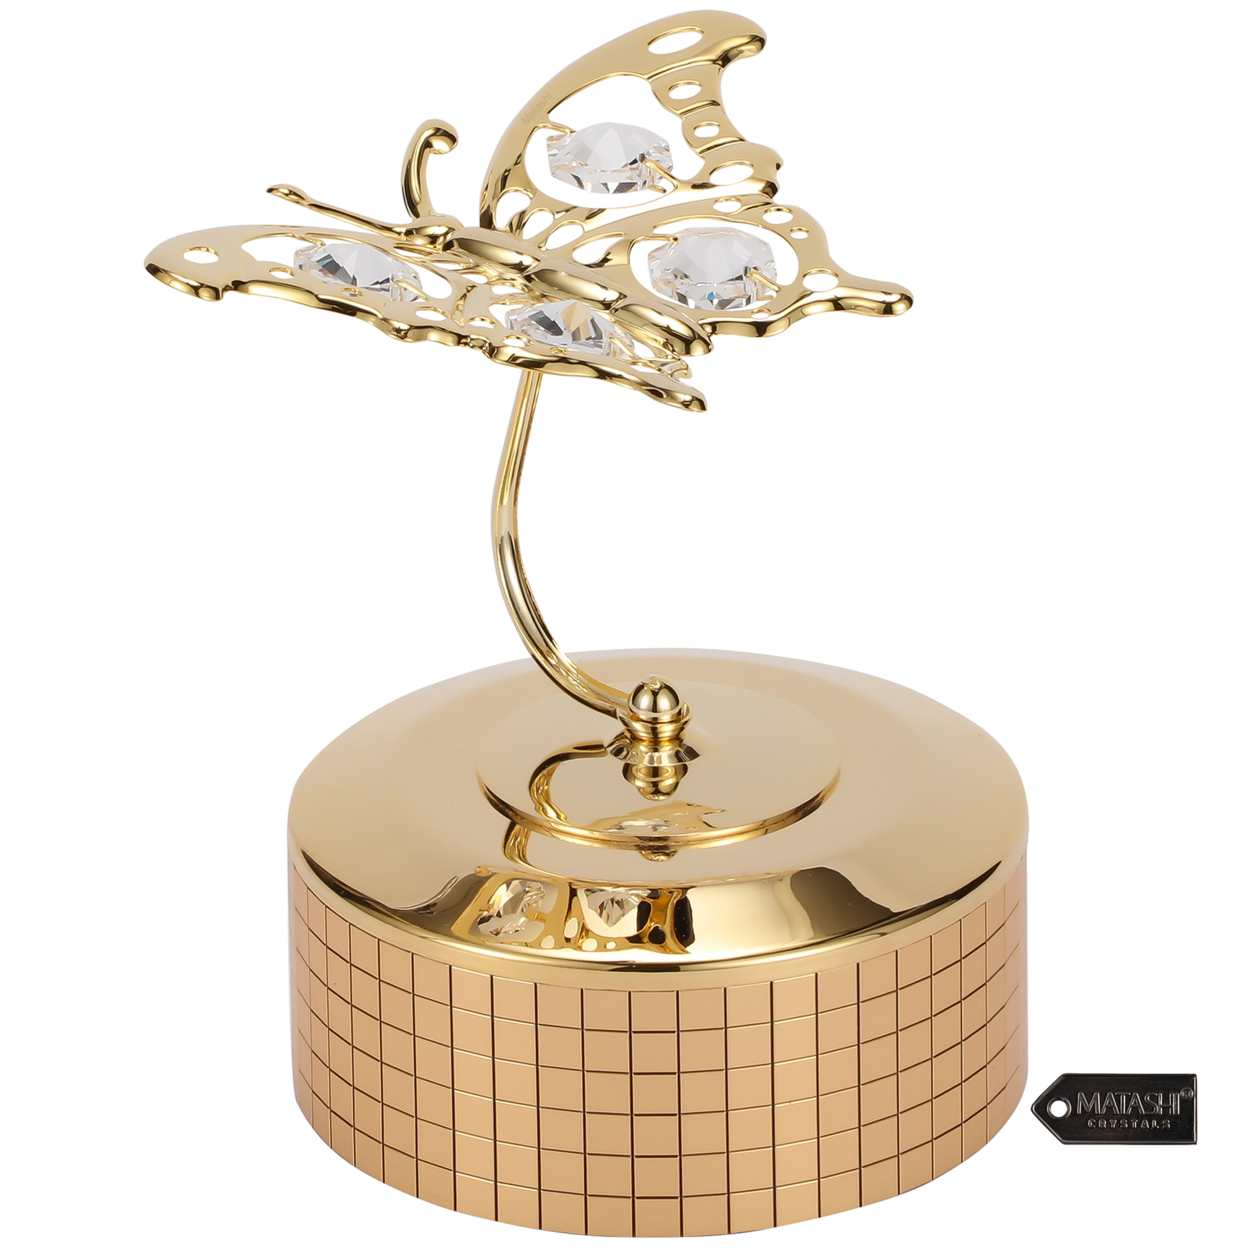 Matashi 24K Gold Plated Music Box With Crystal Studded Butterfly Figurine